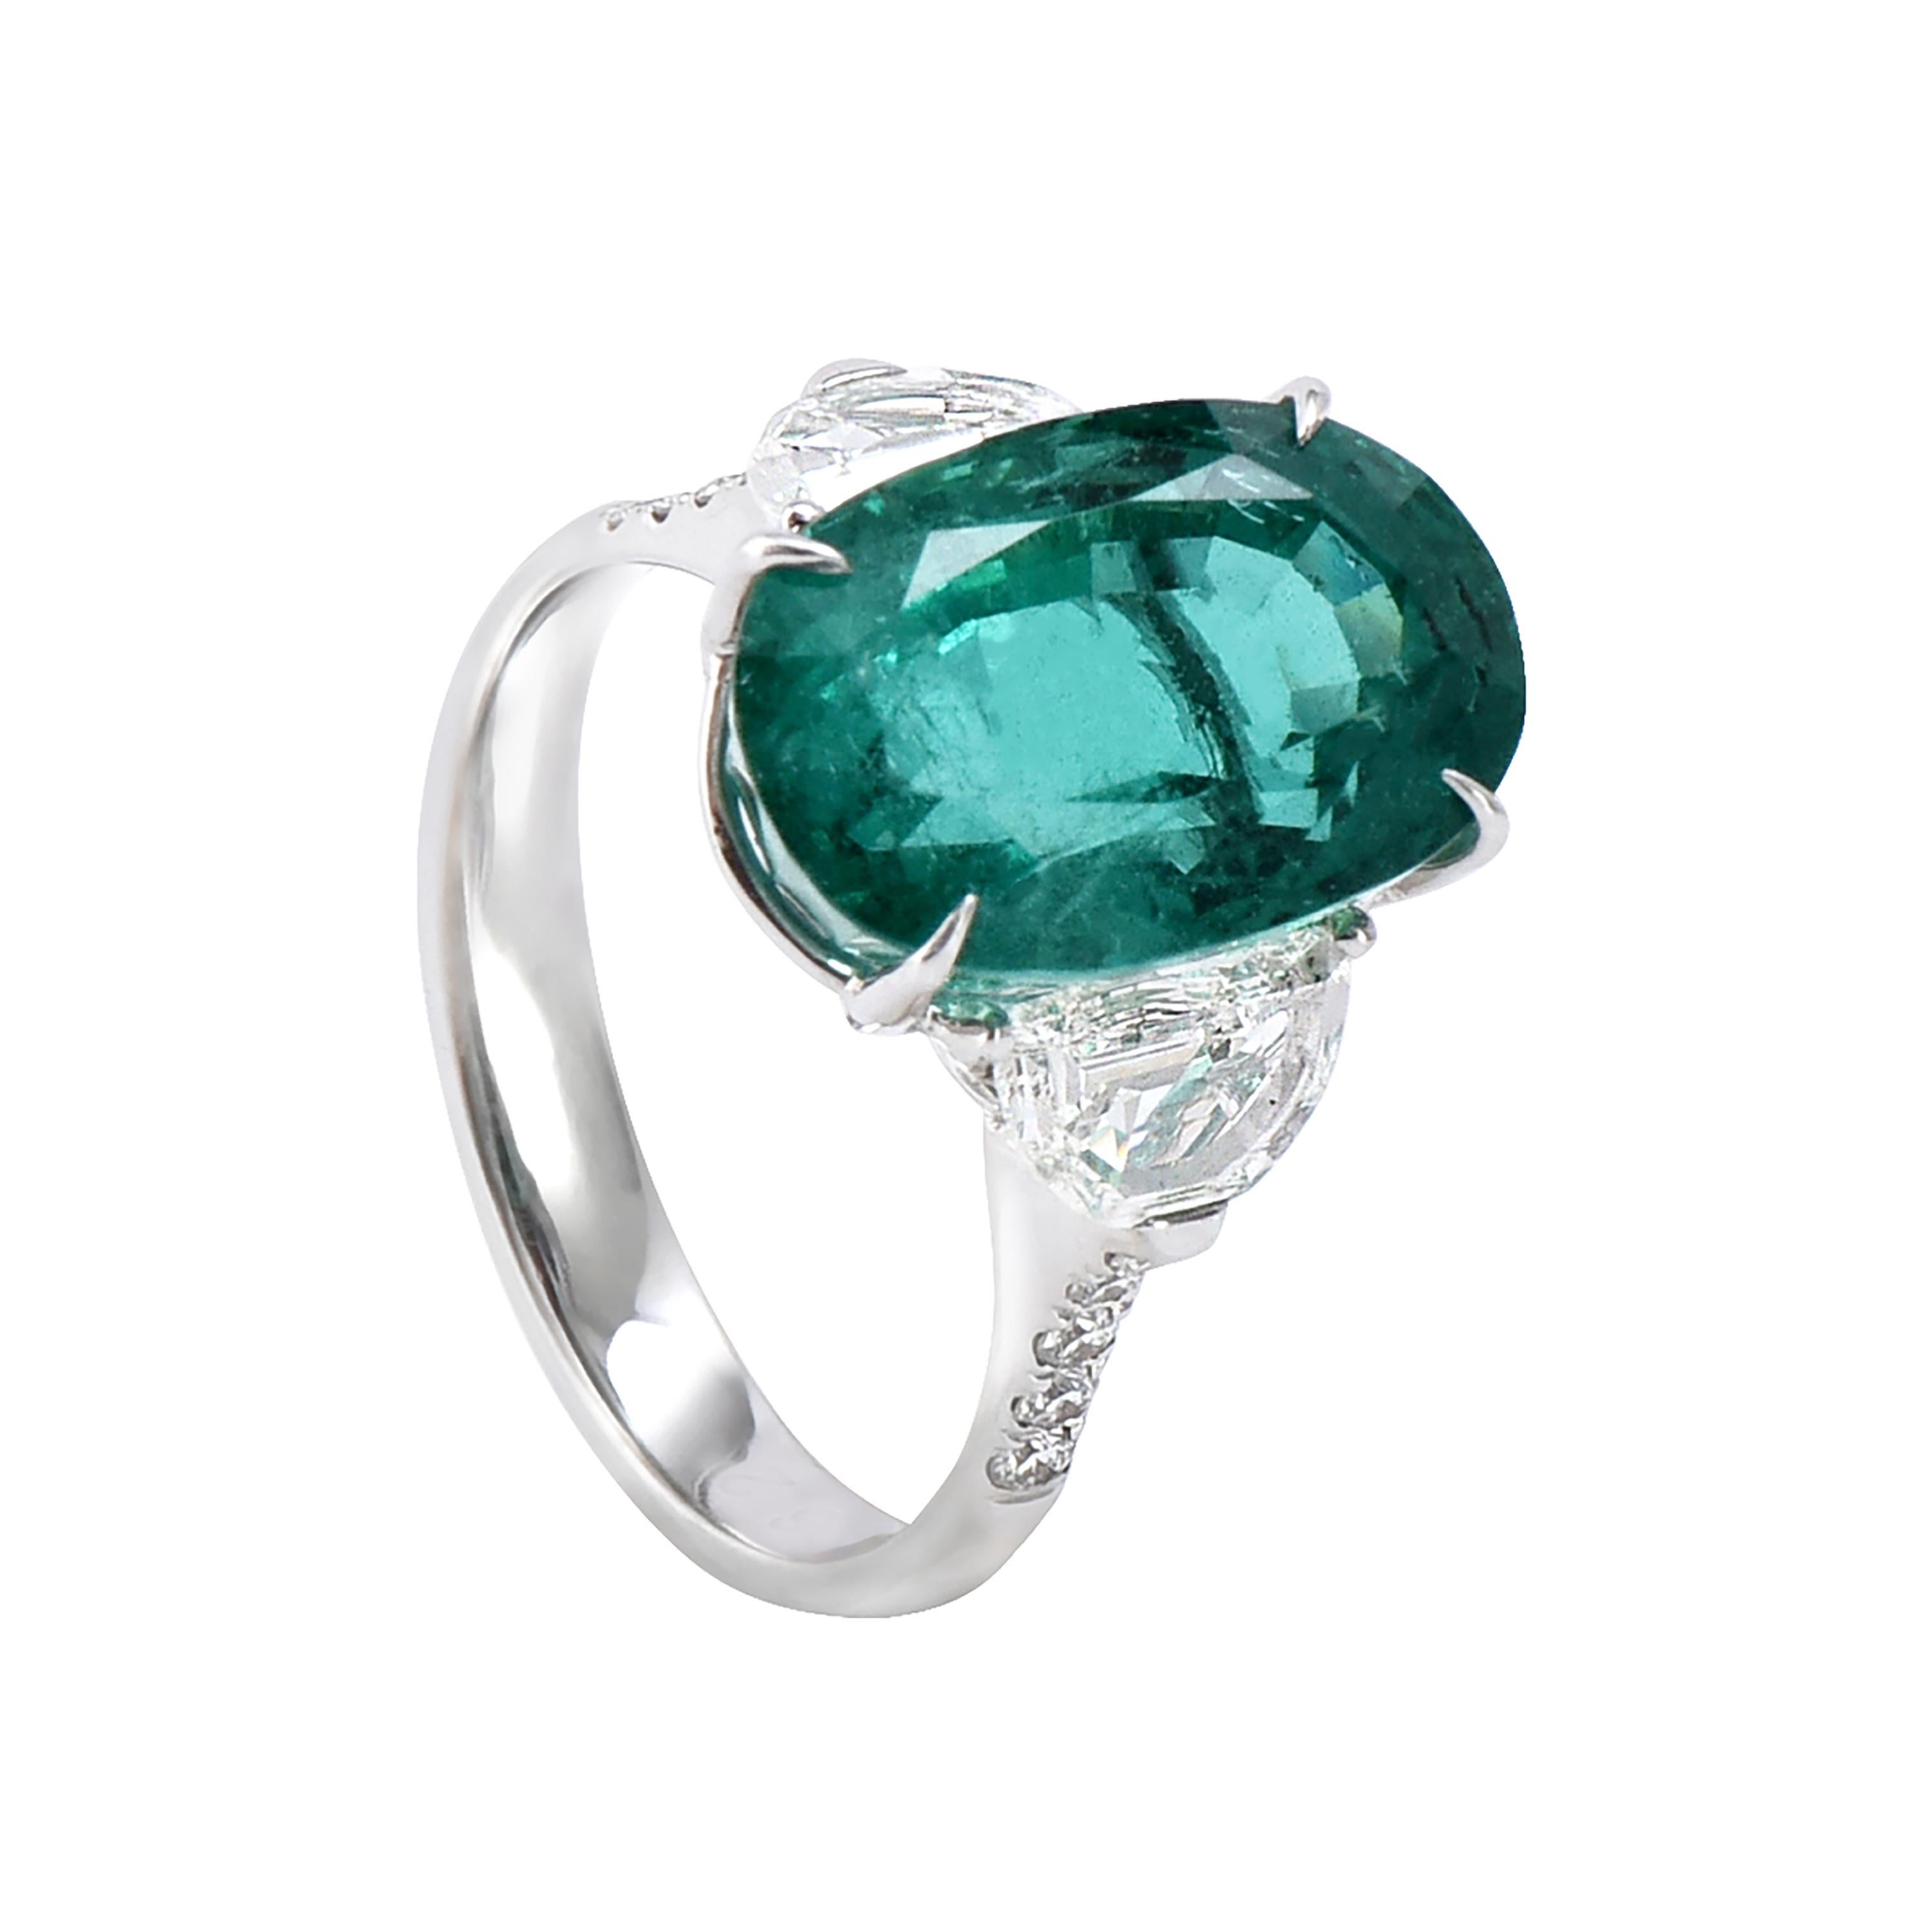 18 karat white gold emerald ring from the Princess collection of Laviere. The ring is set with a GIA certified 7.49 carats Zambian emerald, 0.15 carats round brilliant cut diamonds and two half moon cut diamonds totaling 0.89 carats.  
Gold Weight